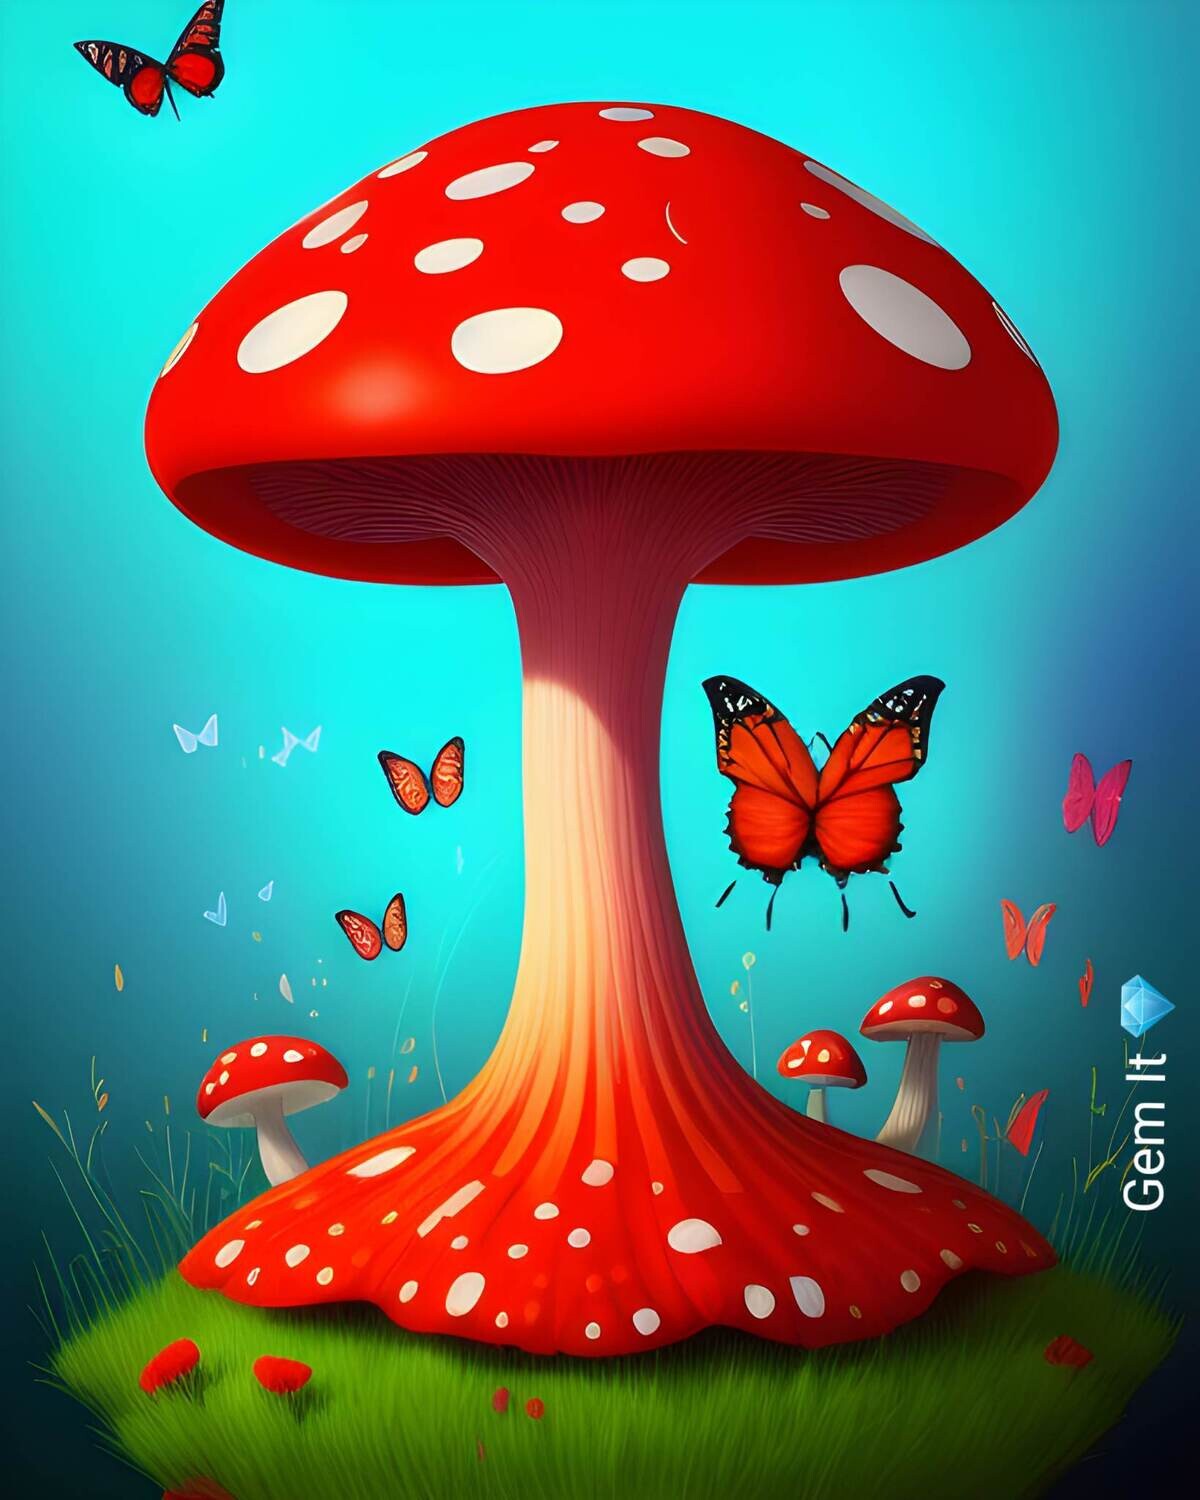 Red Toadstool - Specially ordered for you. Delivery is approximately 4 - 6 weeks.